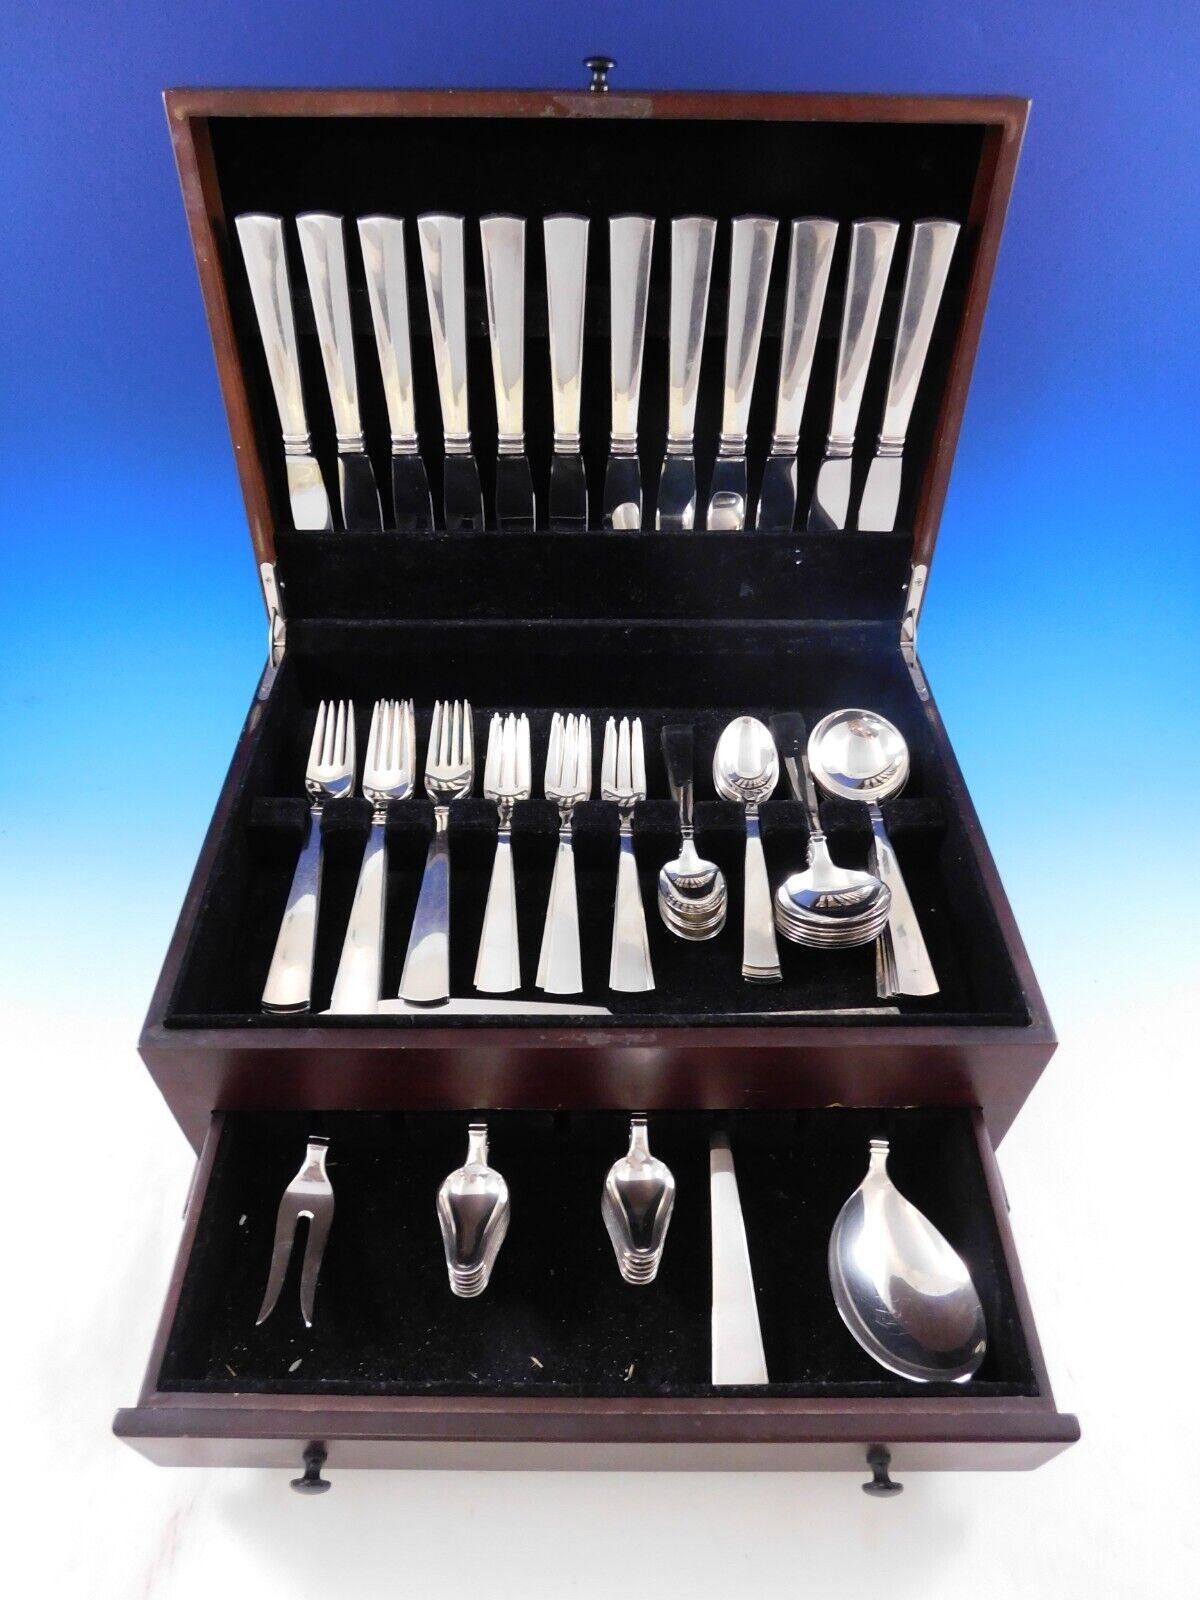 Bell by Peter Hertz Danish Mid-Century Modern sterling silver flatware set - 76 Pieces. This set includes:

12 dinner knives, 8 3/4